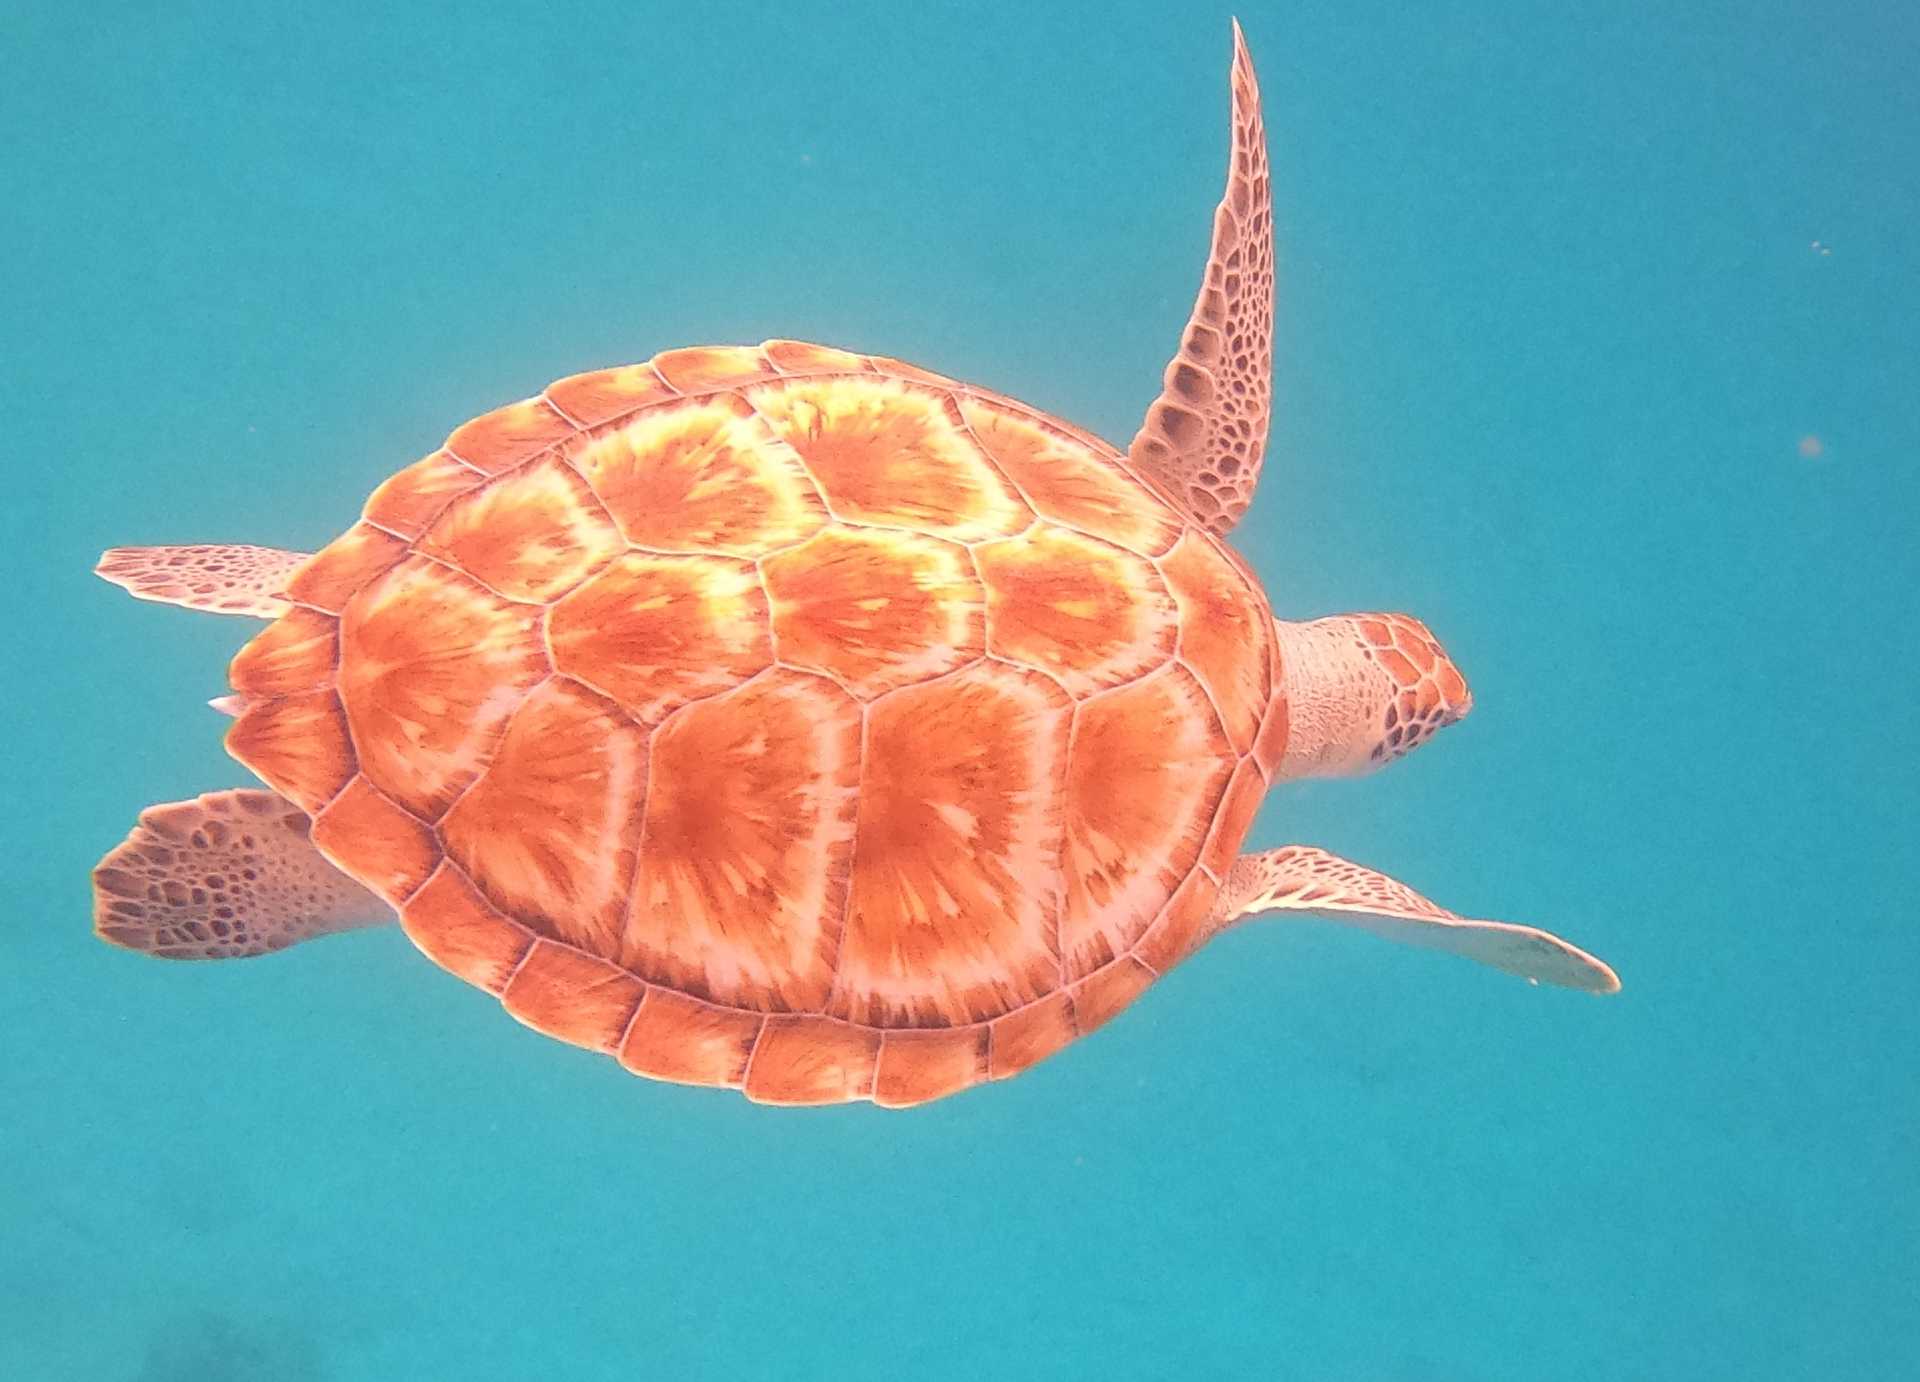 Barbados is home to a large population of sea turtles. Clear waters and calm seas combine to create incredible viewing opportunities during snorkeling and scuba expeditions.